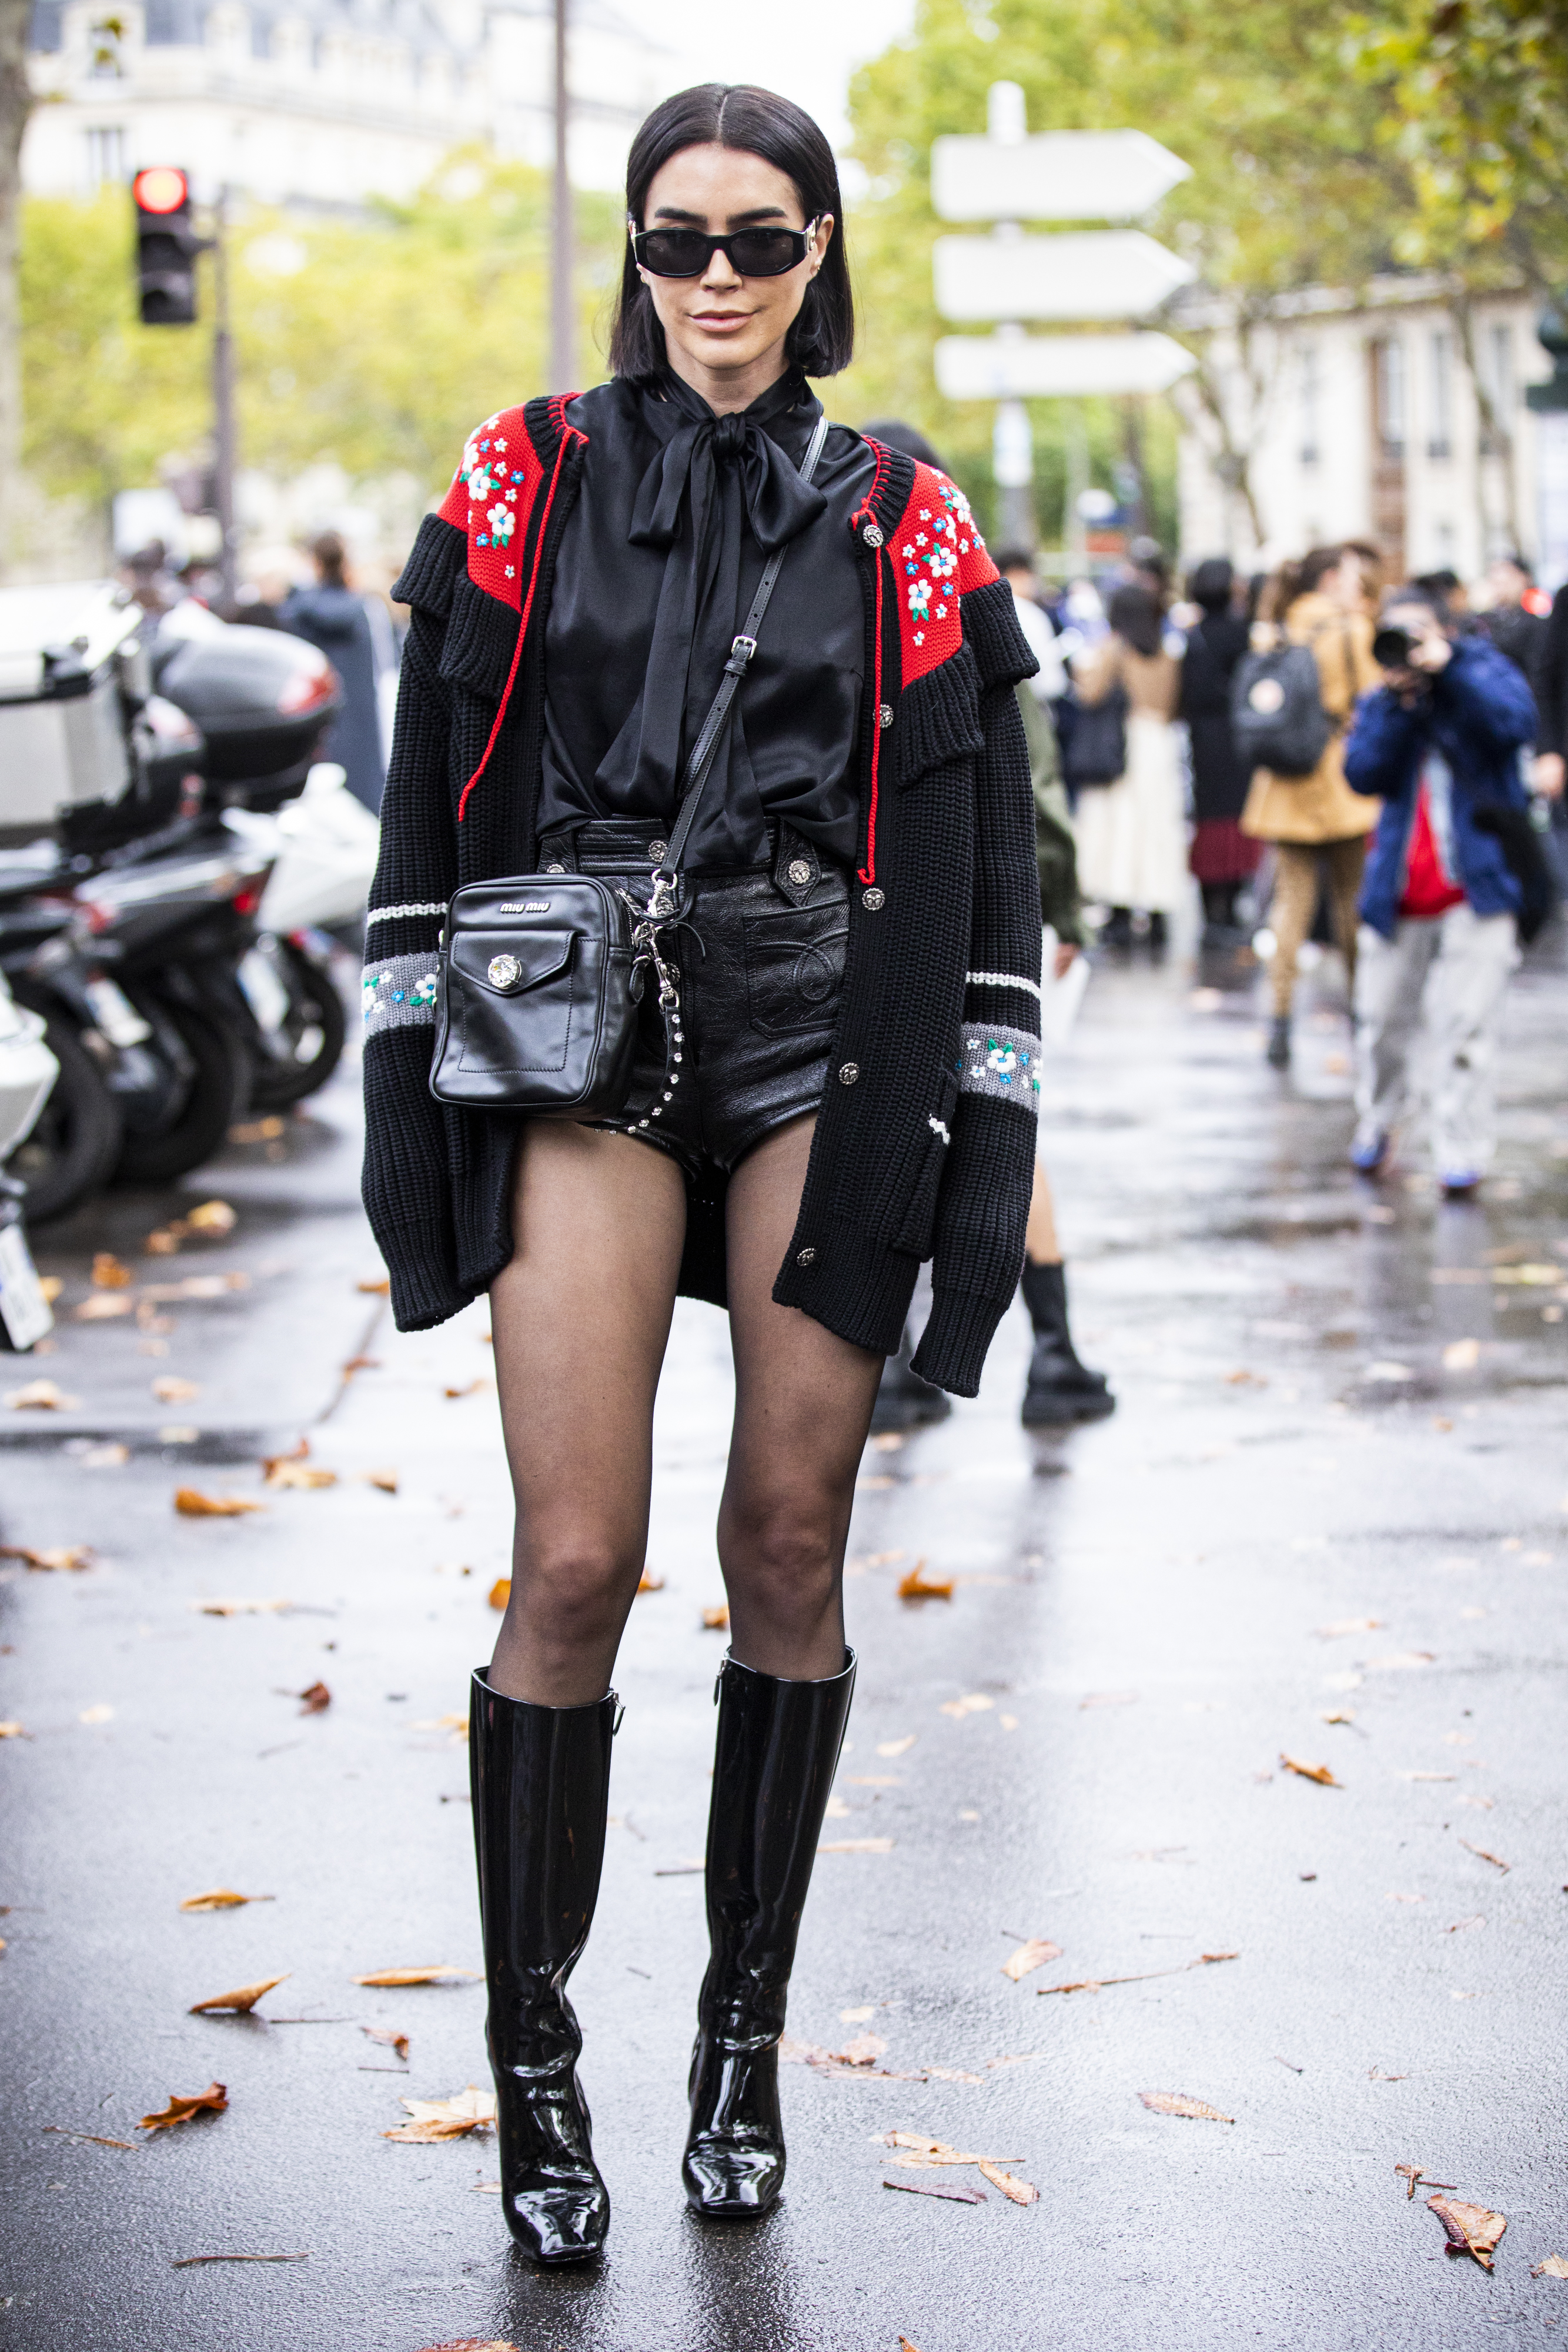 How To-The-Knee Boots Became The Most Versatile Shoe Of The Season - Grazia